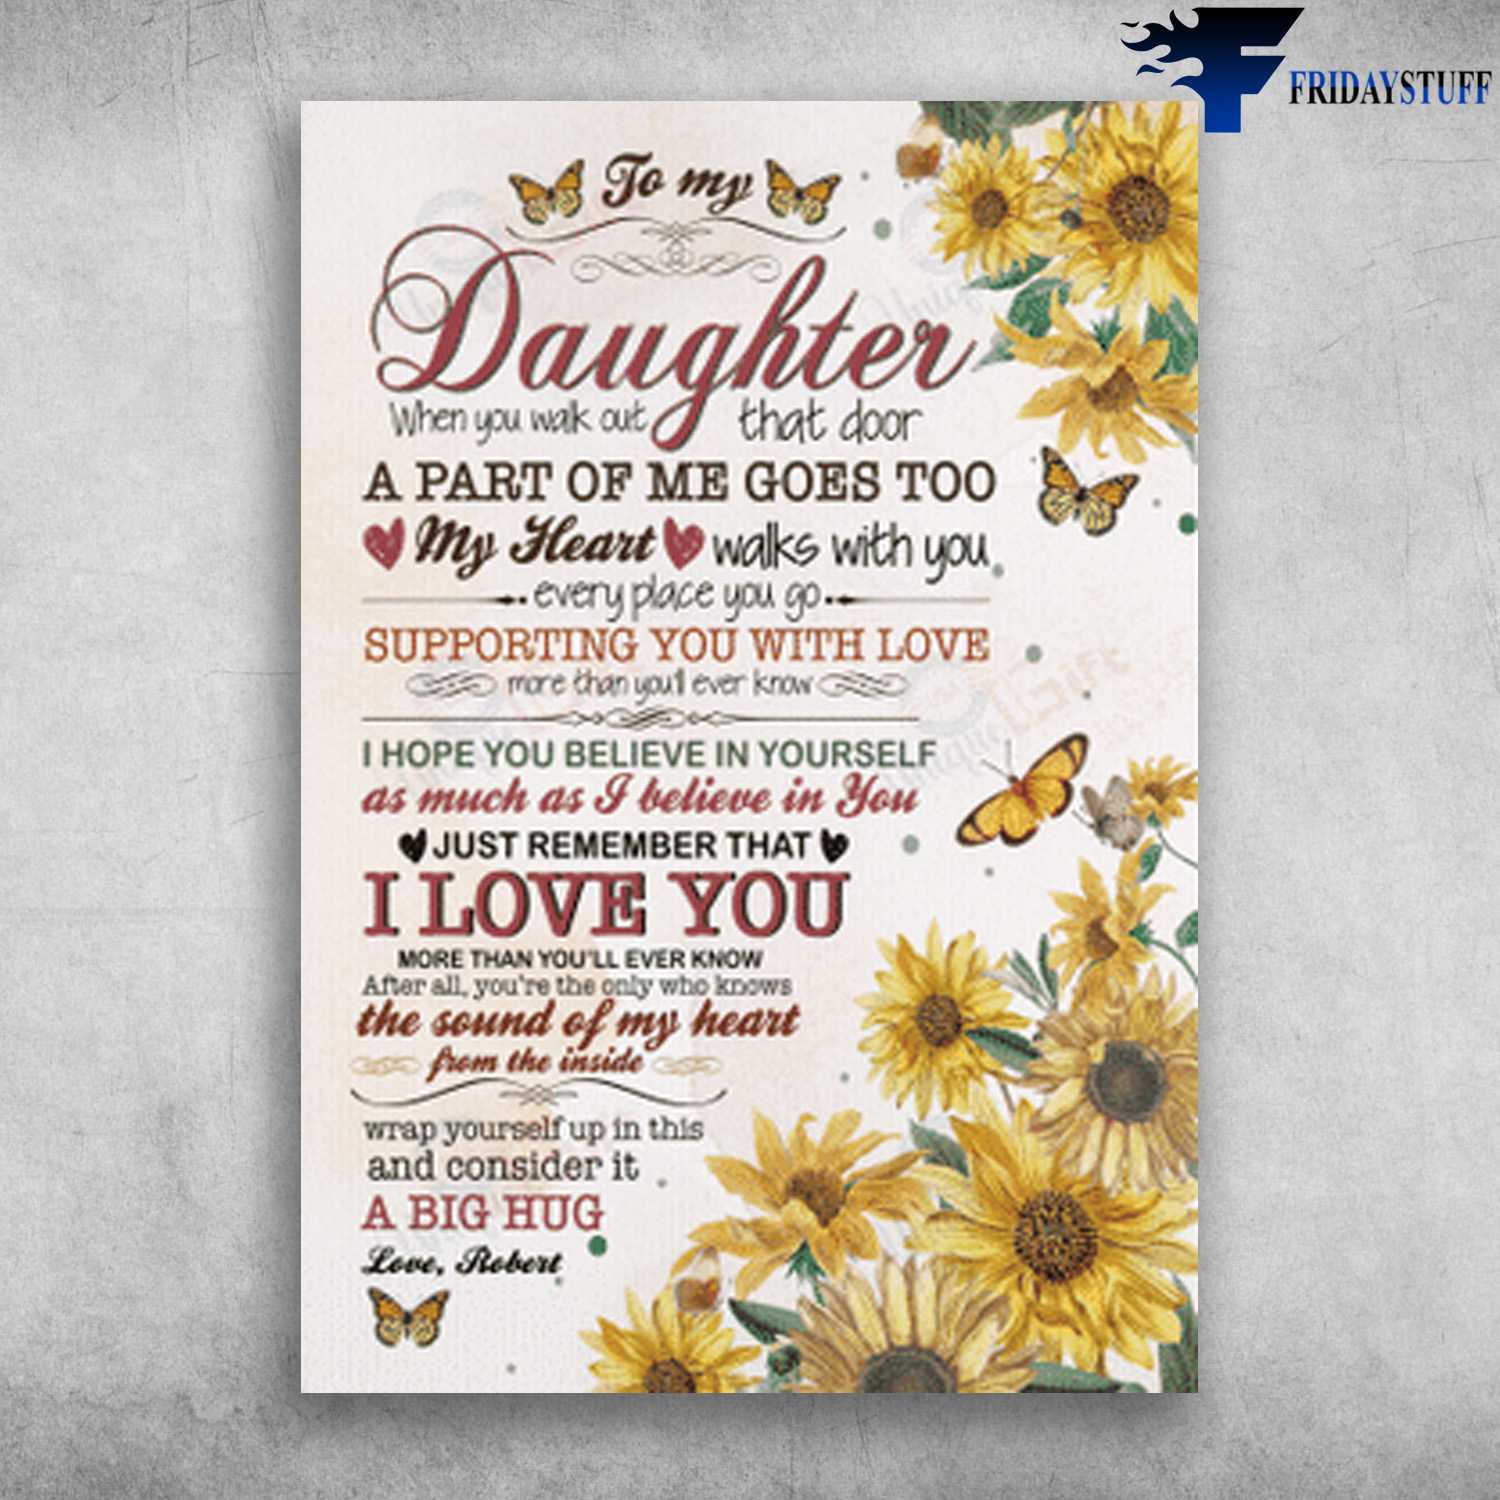 Daughter Gift, Butterfly Flower, To My Daughter, When You Walk Out, That Door A Part Of Me Goes Too, My Heart Walks With You, Every Place You Go, Supporting You With Love, More Than You'll Ever Know